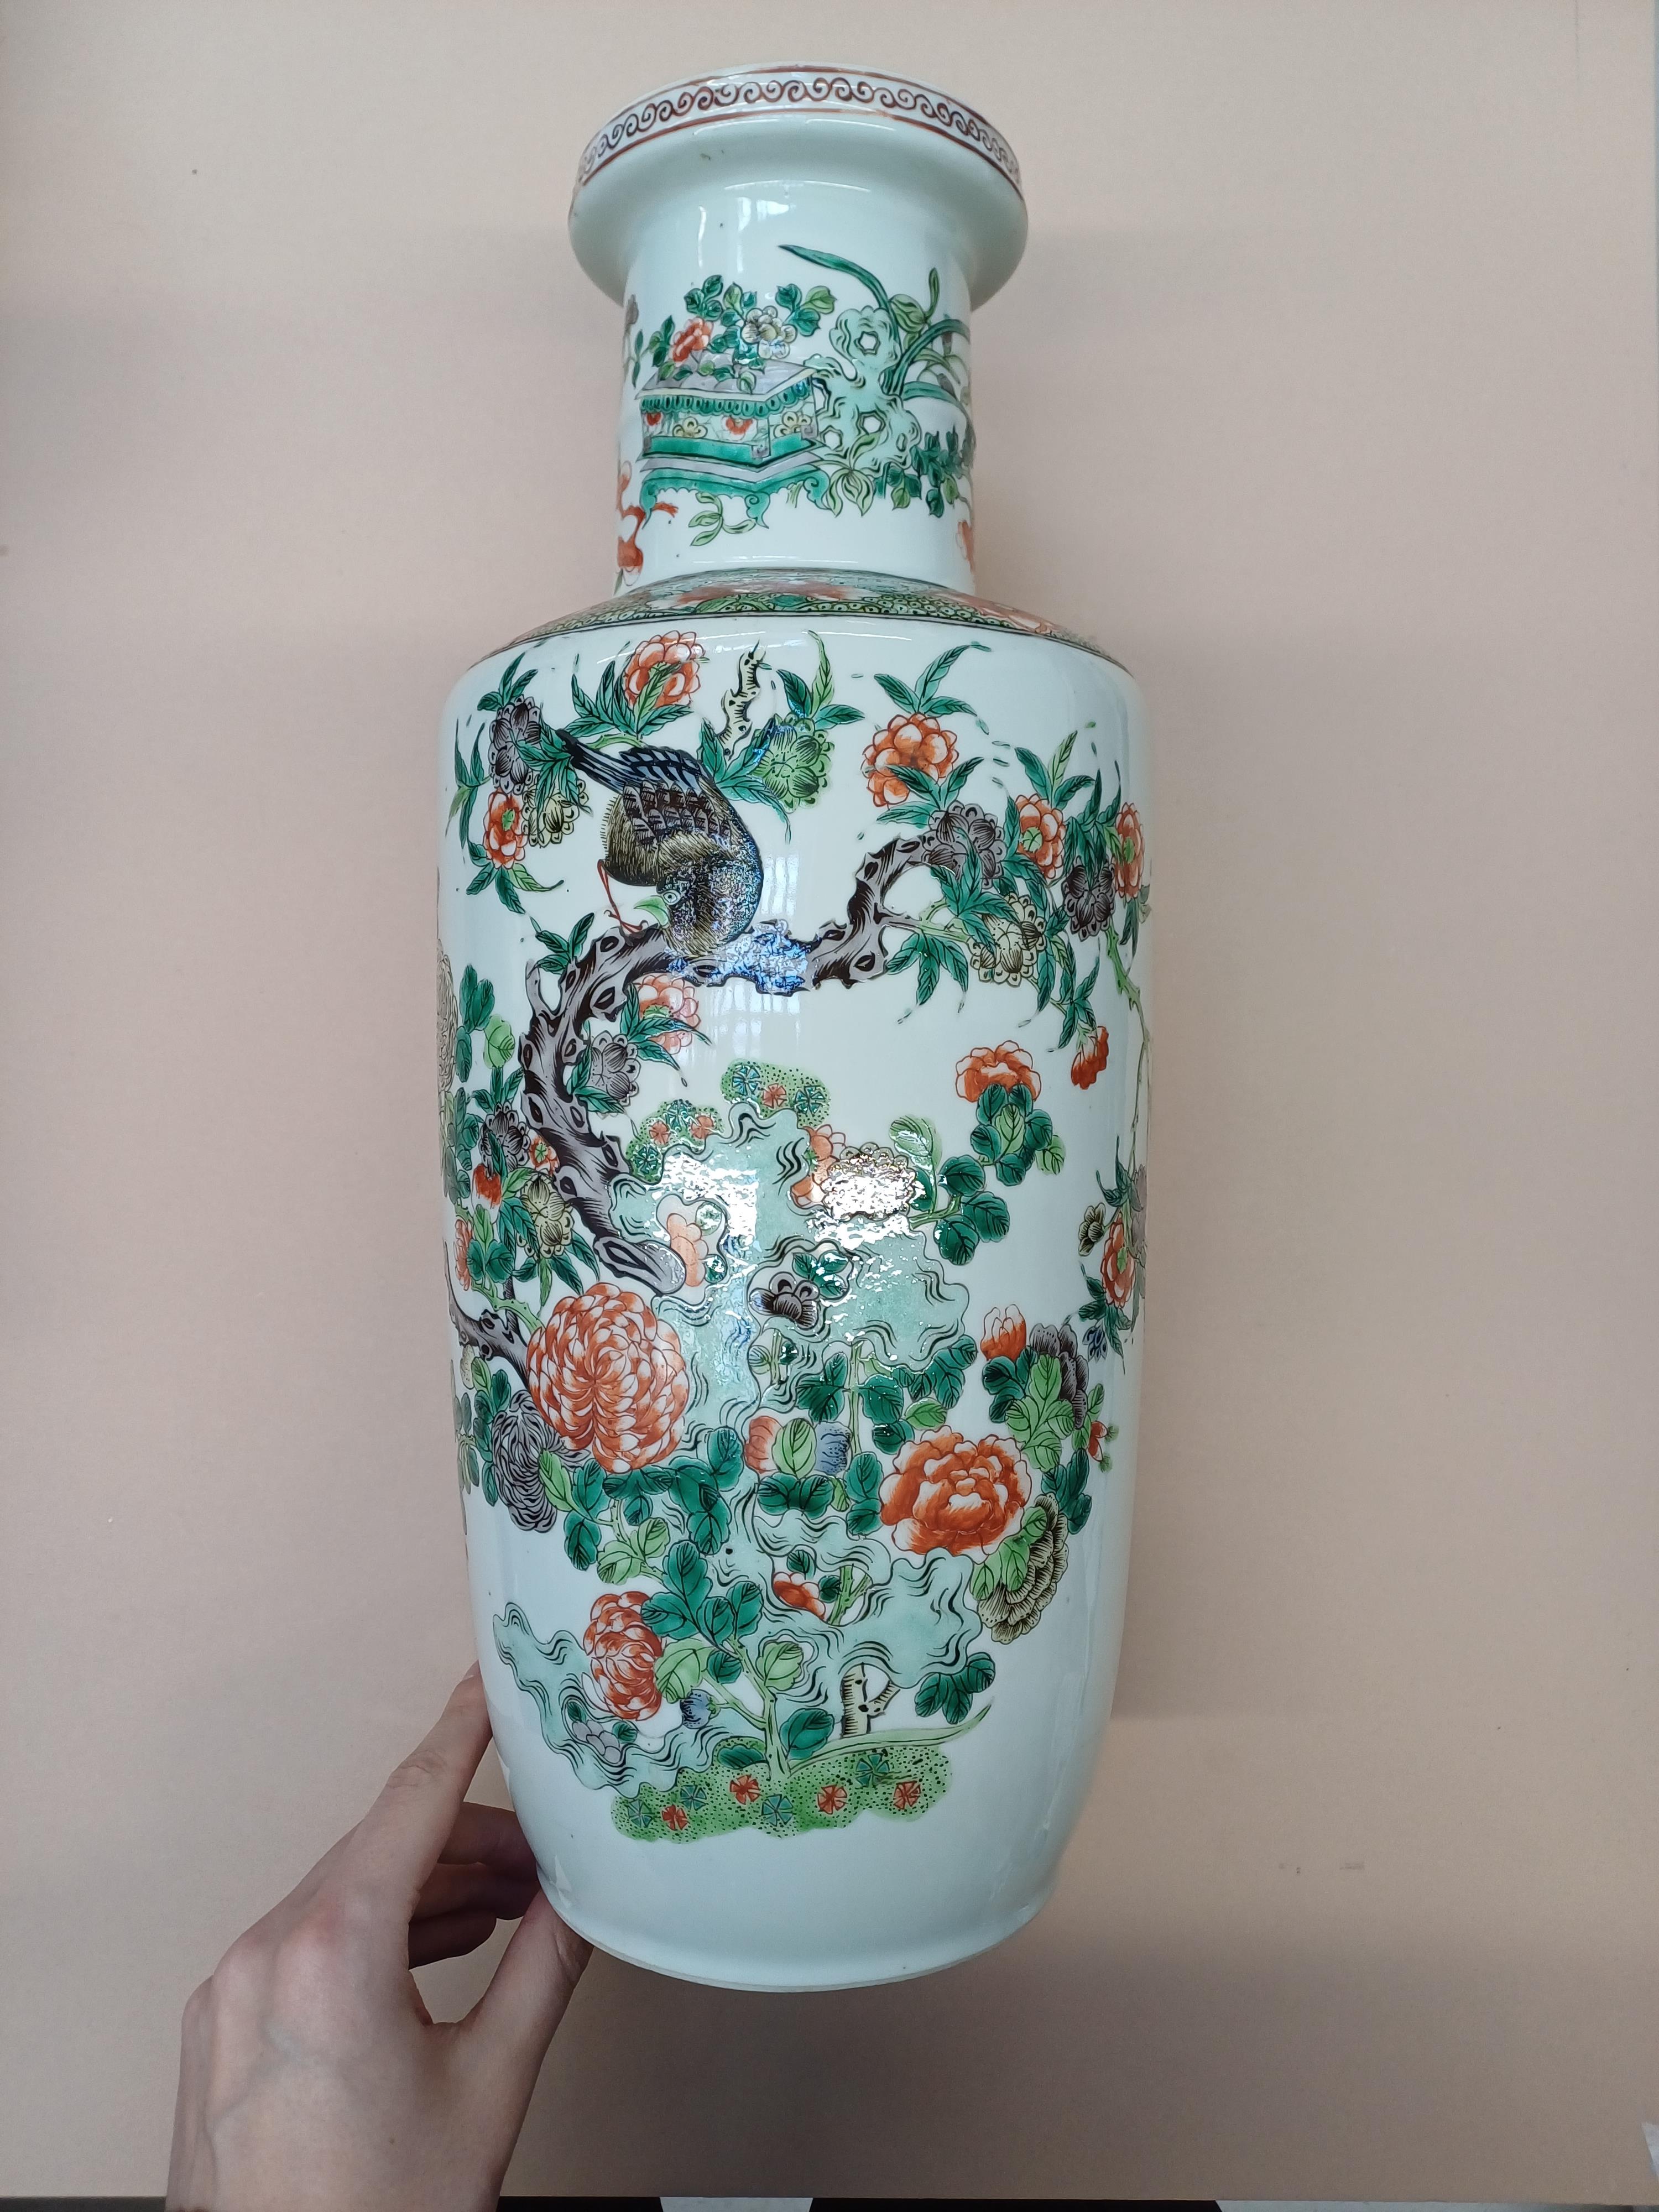 A PAIR OF FINE CHINESE FAMILLE-VERTE ‘BIRD AND BLOSSOM’ VASES 清康熙 五彩花鳥圖紋瓶一對 - Image 9 of 16